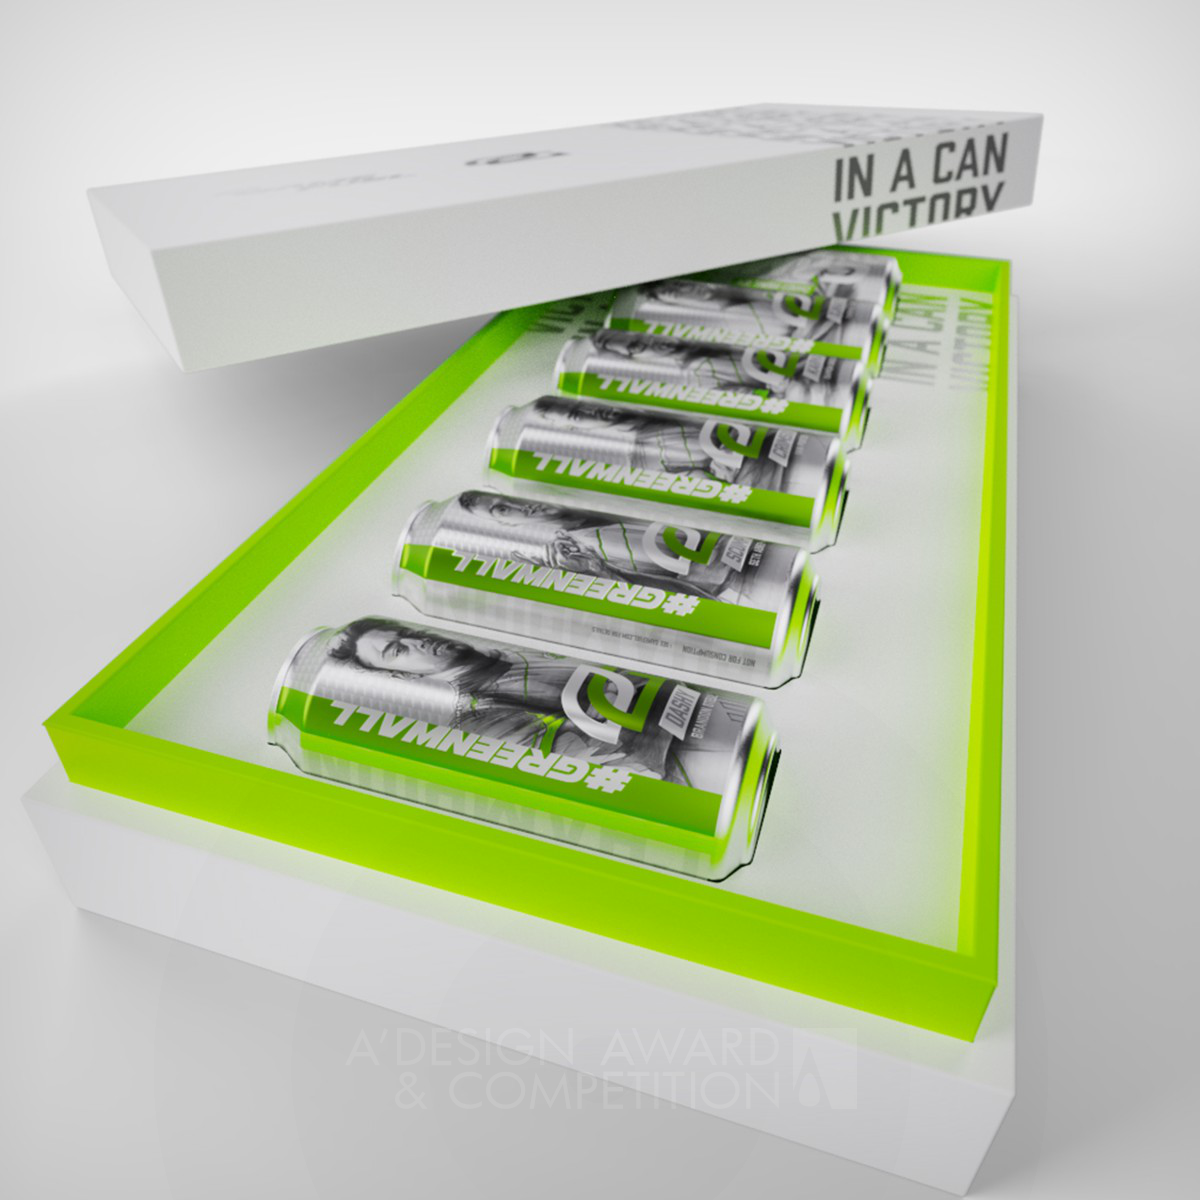 Game Fuel Team Optic Champions Can Packaging by PepsiCo Design and Innovation